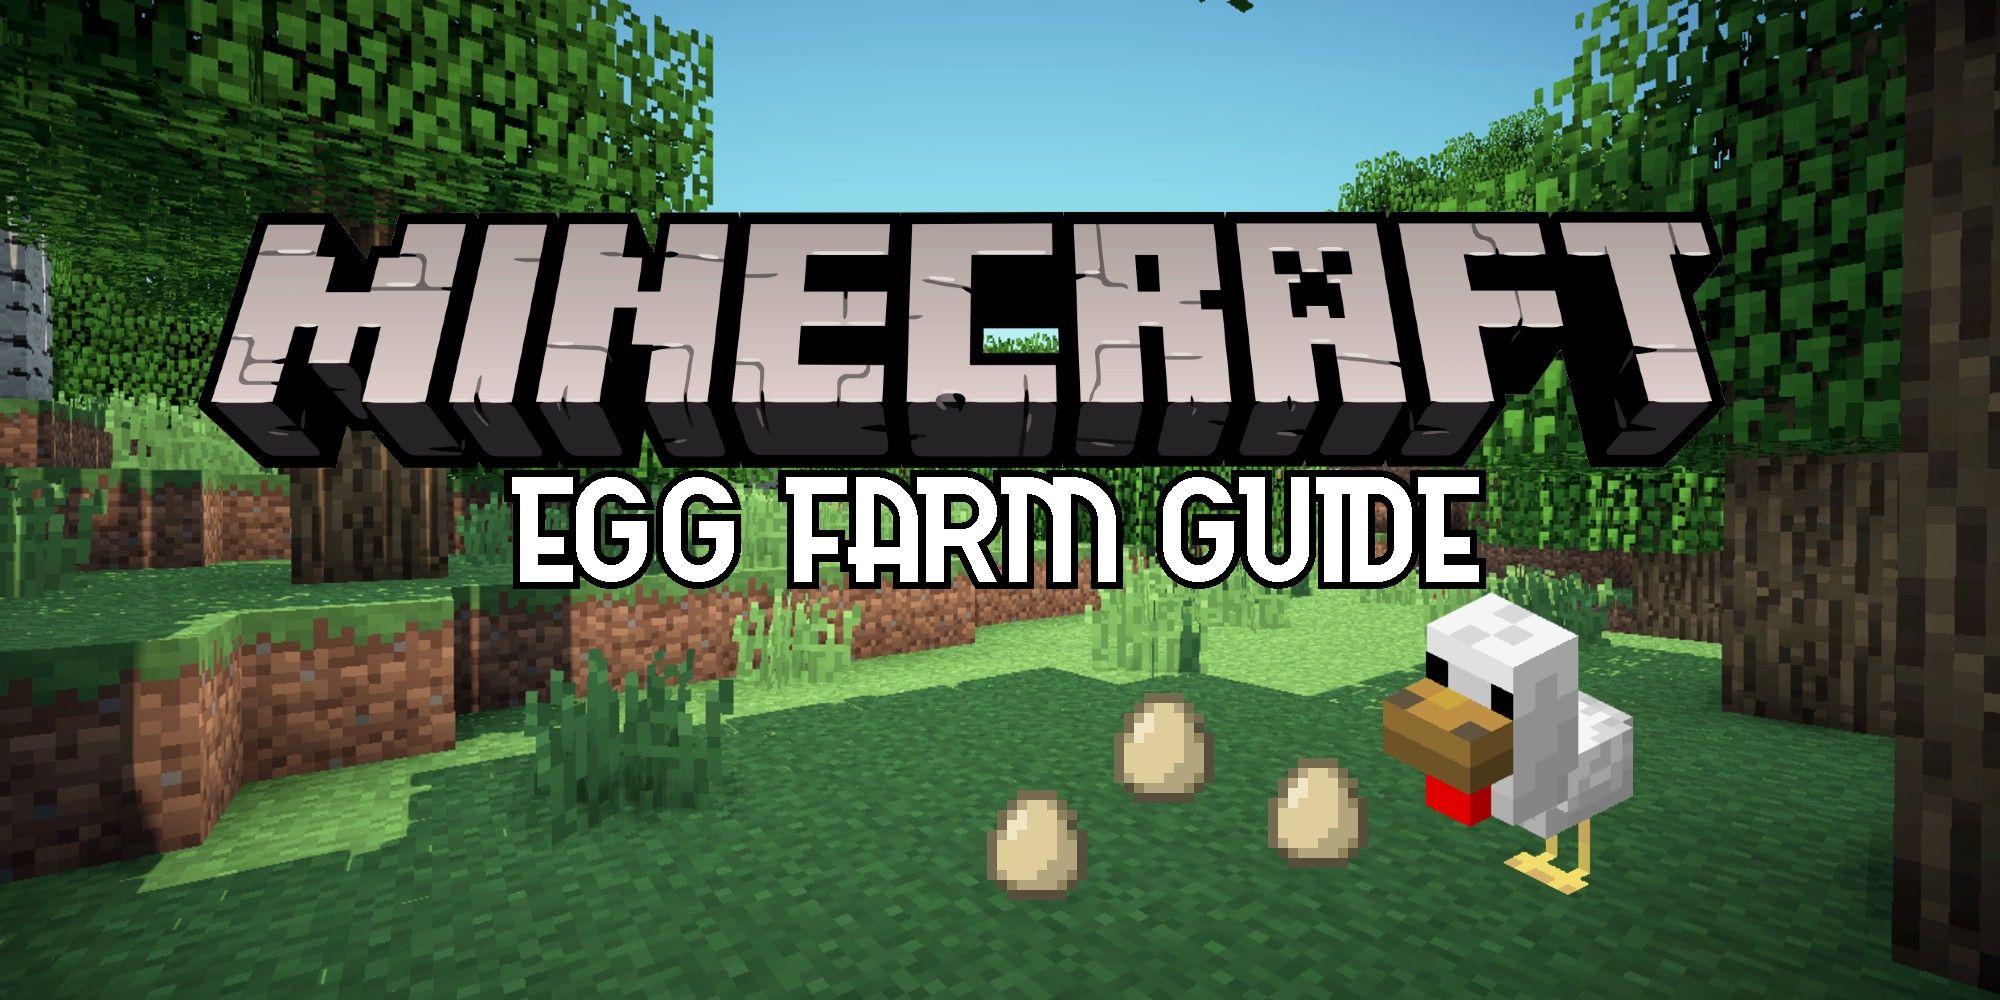 chickens egg and minecraft logo